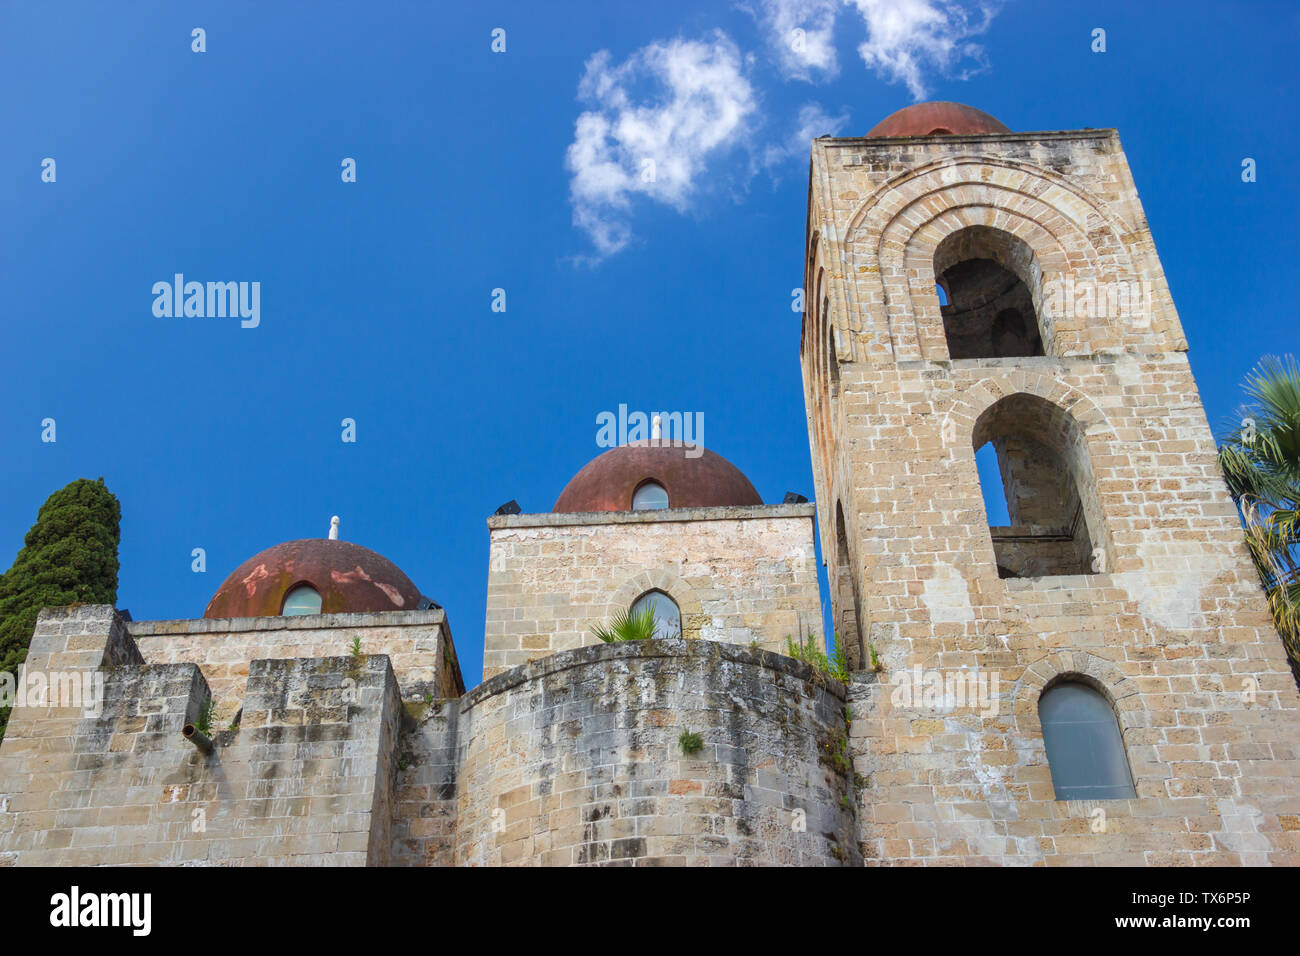 Historical tourist church San Giovanni degli Eremiti in Palermo Sicily, close view of the arabic facade and bell tower with red domes Stock Photo